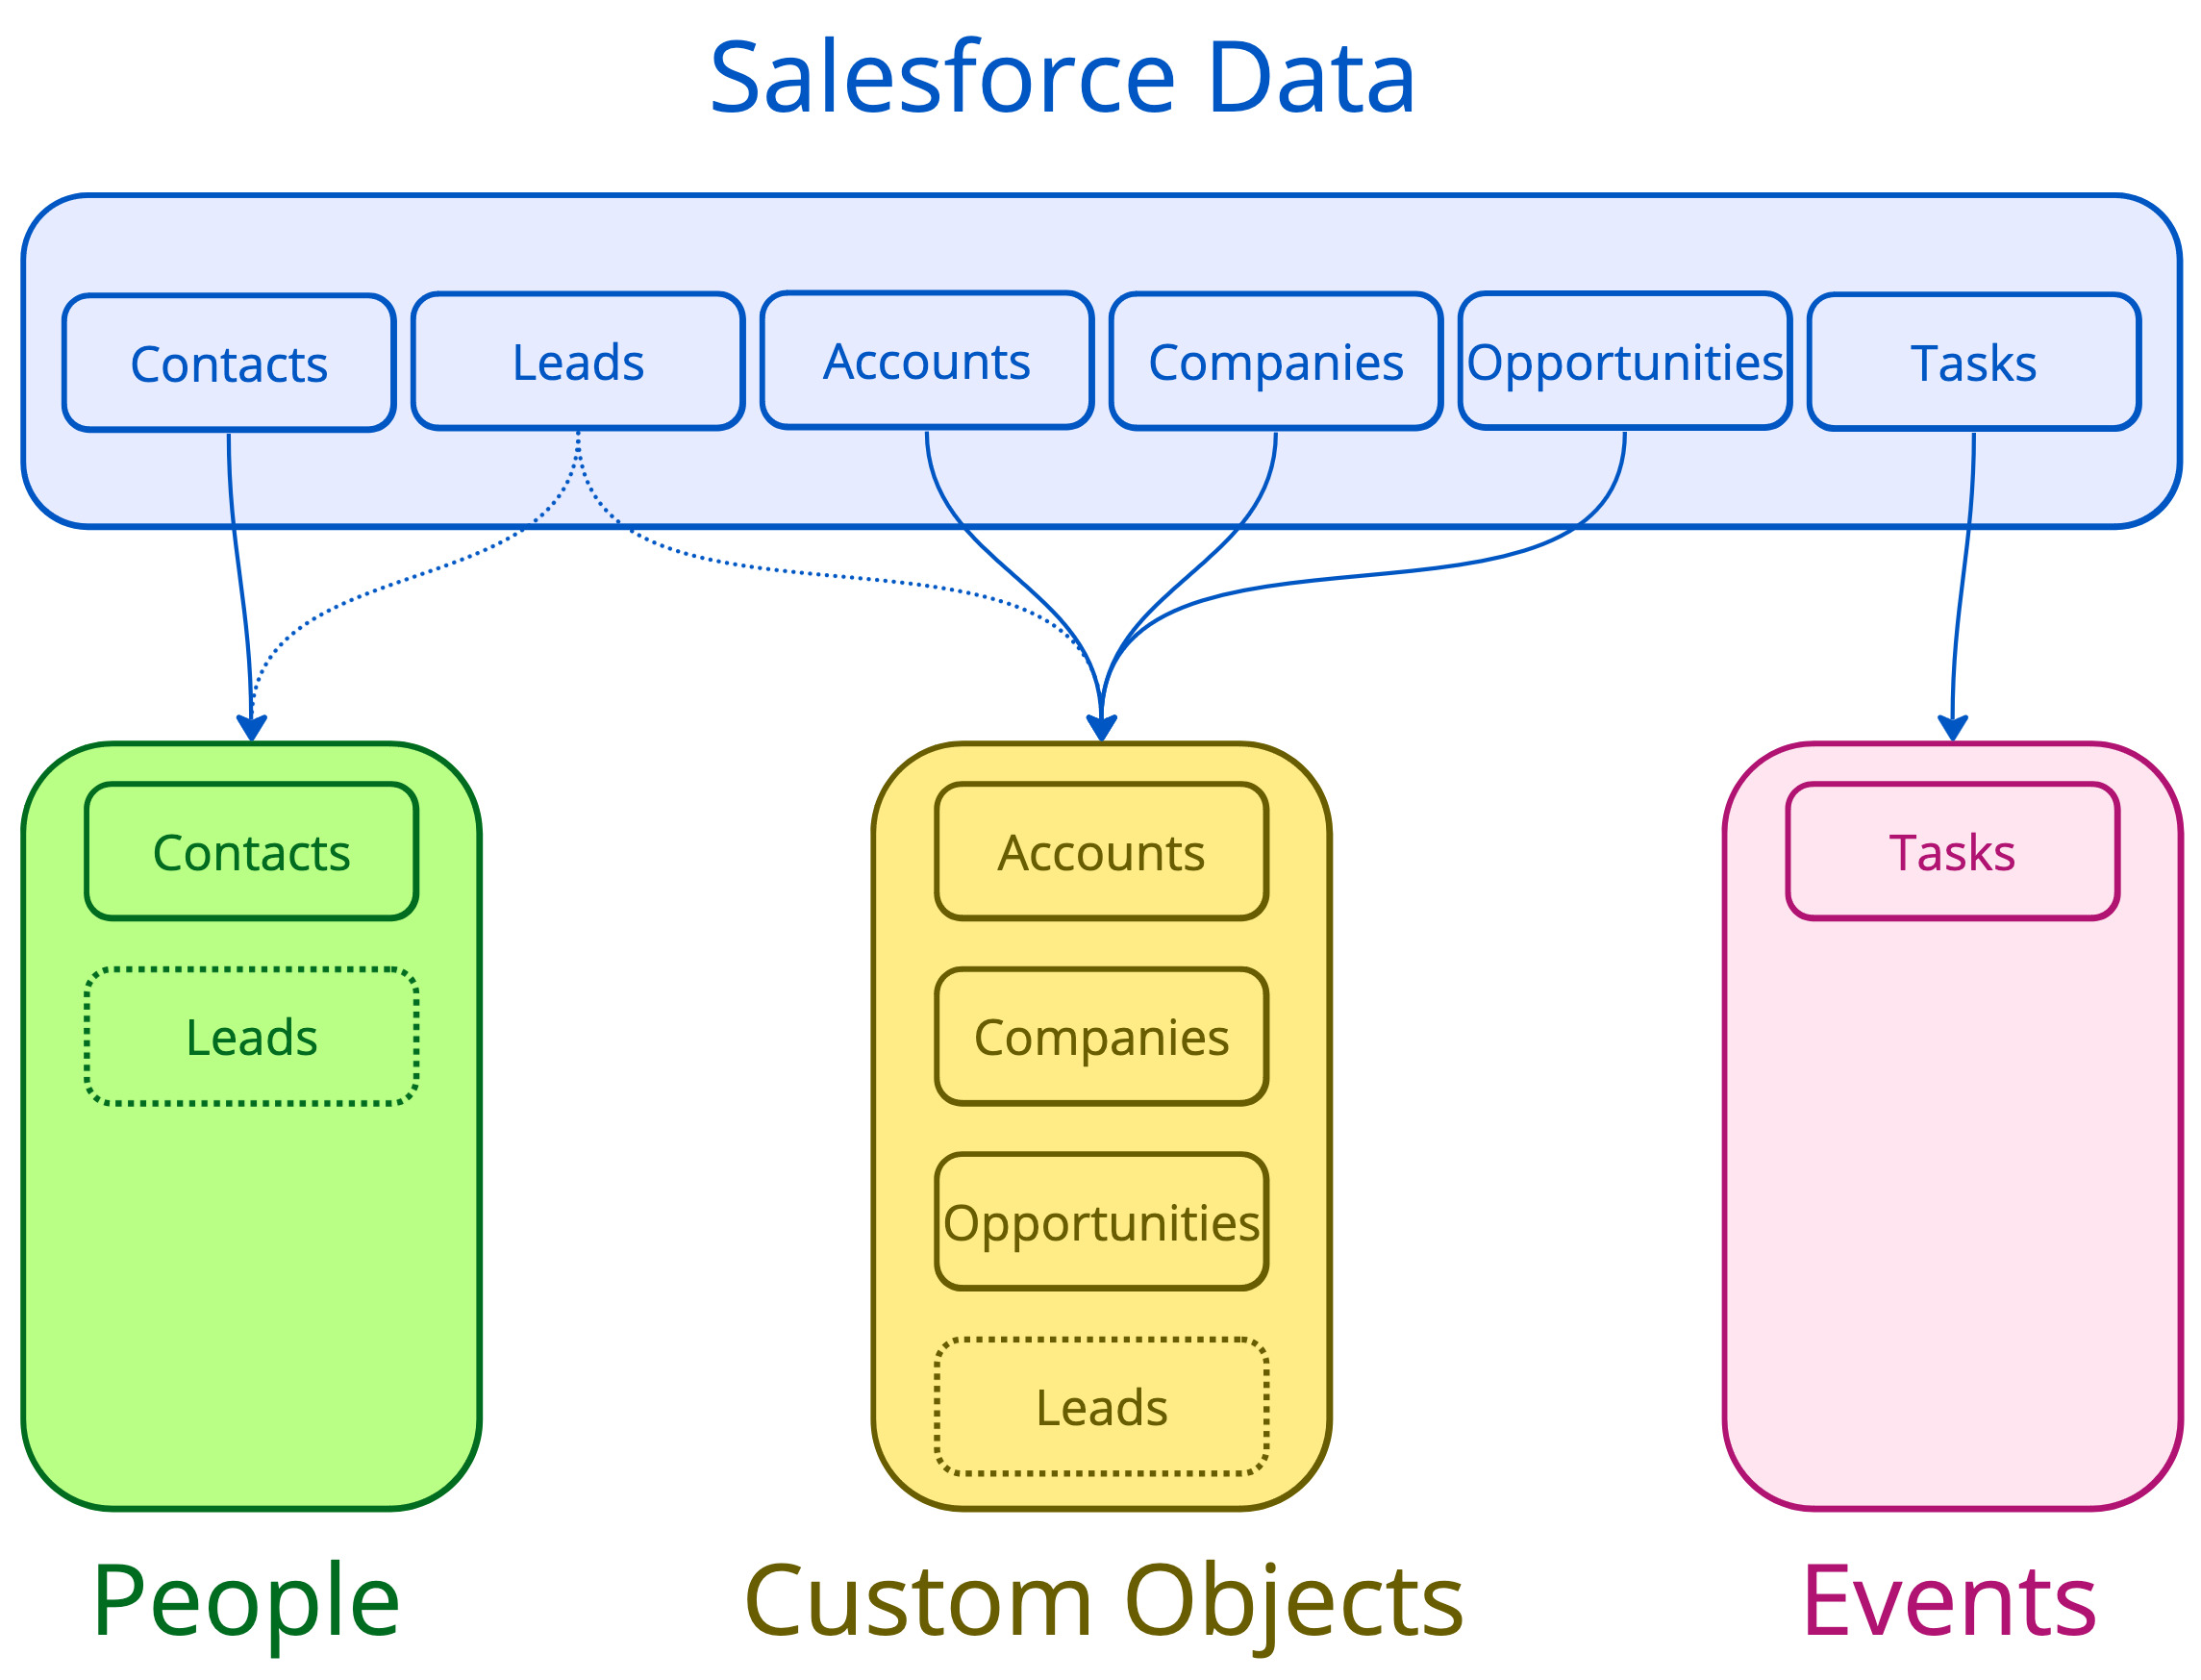 the typical mapping for salesforce entities